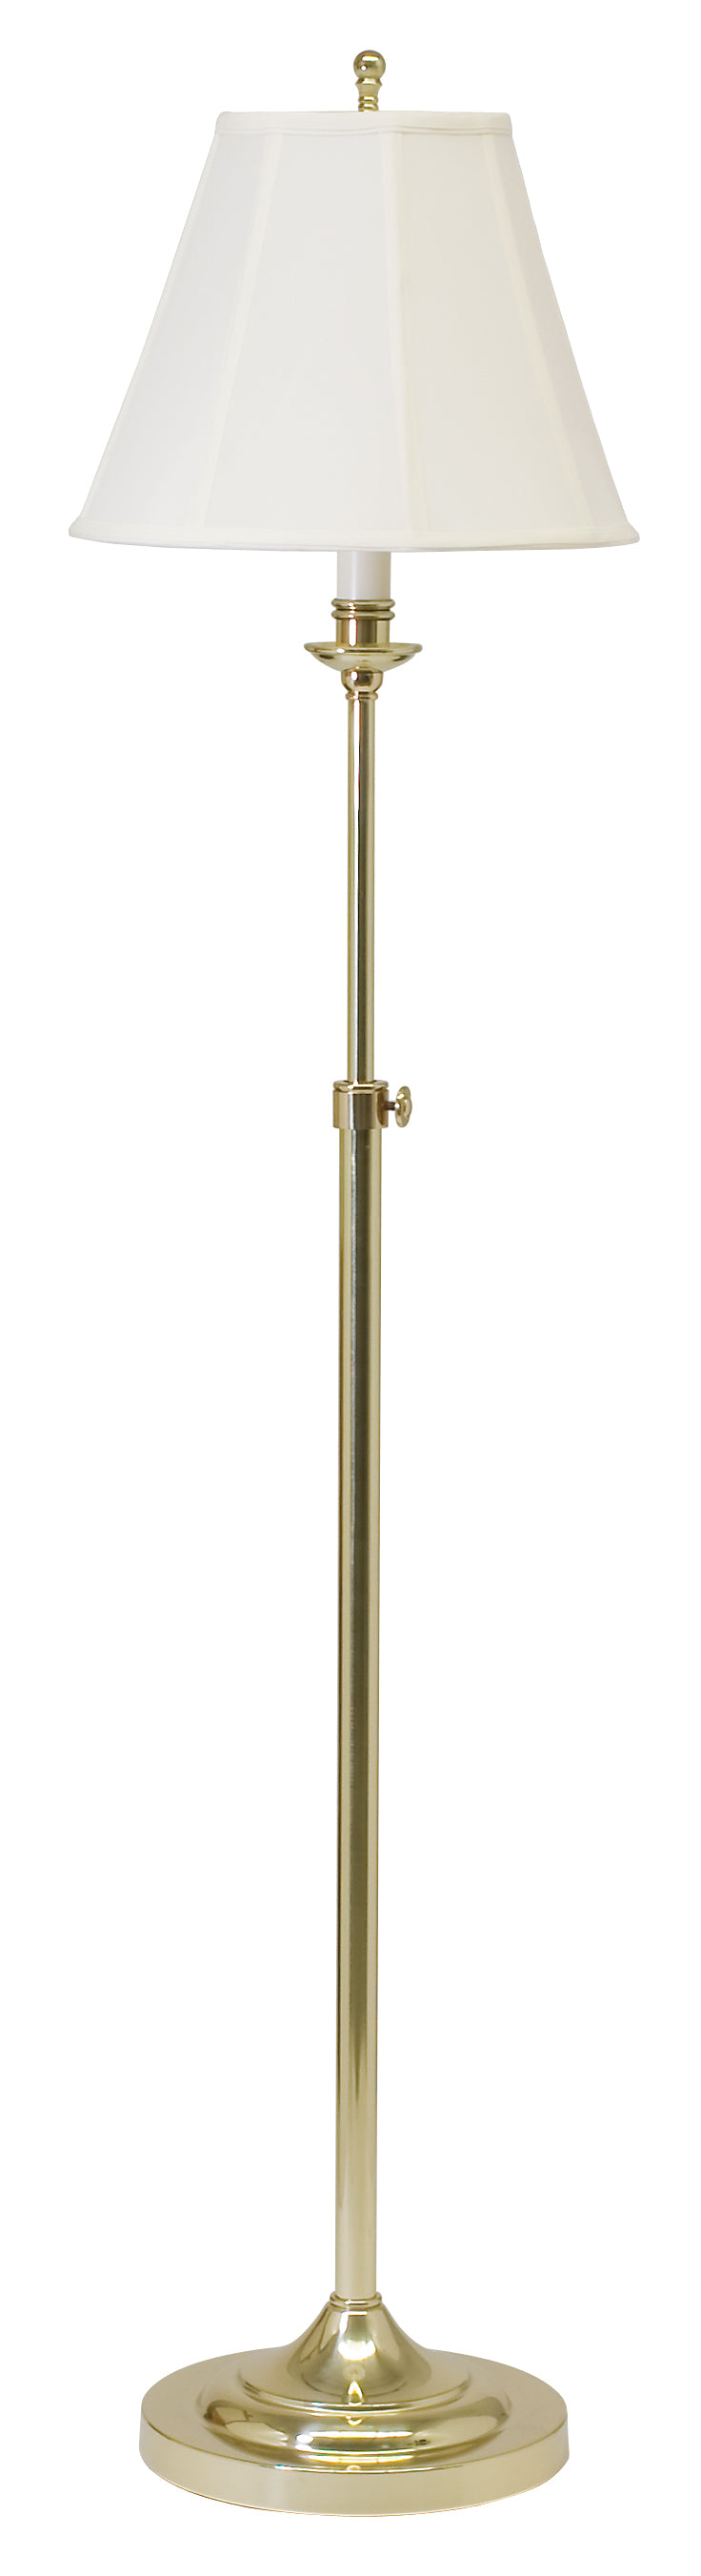 House of Troy Club Adjustable Polished Brass Floor Lamp CL201-PB